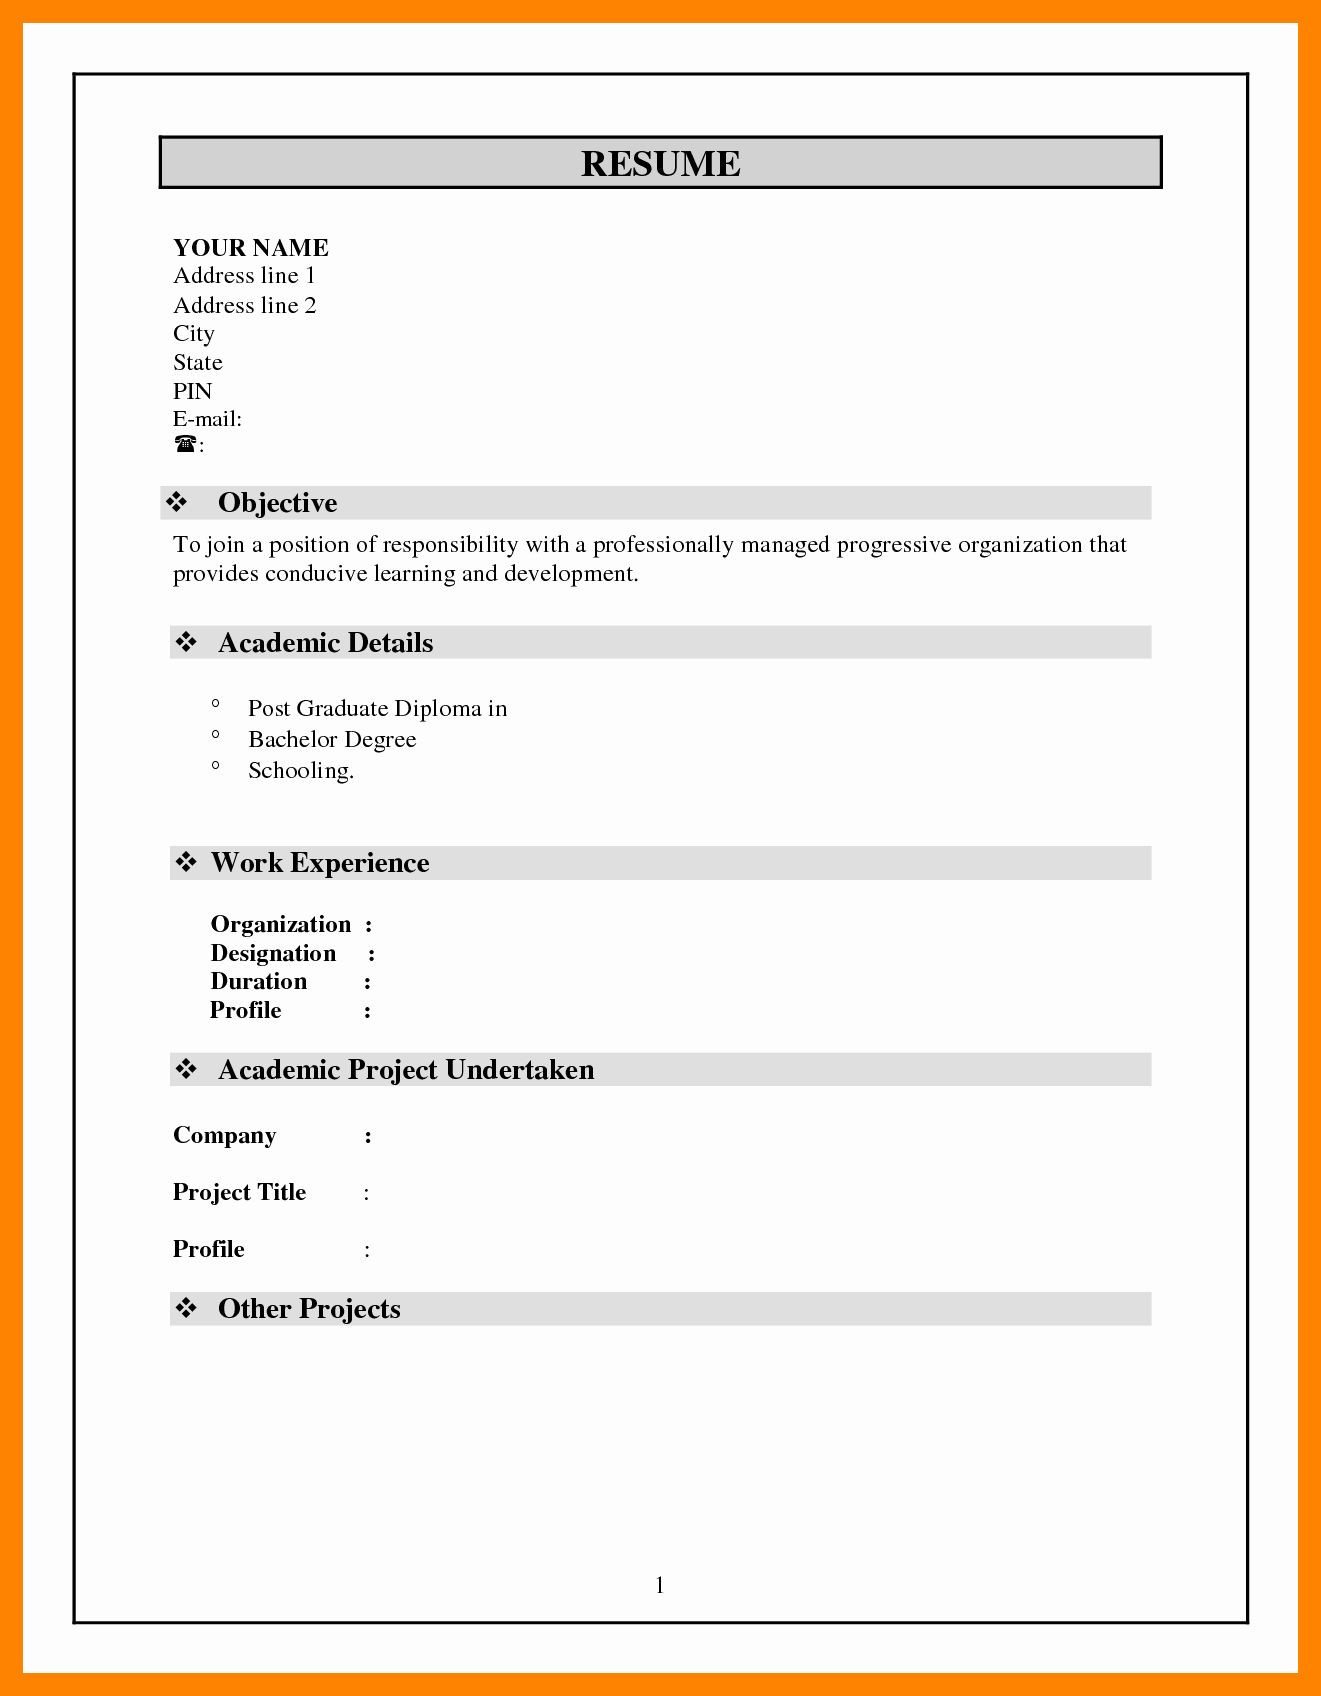 Free Resume Templates Trackid Sp 006 Ms Word 2007 Resume Templates Fresh 5 Cv format Word File Resume …